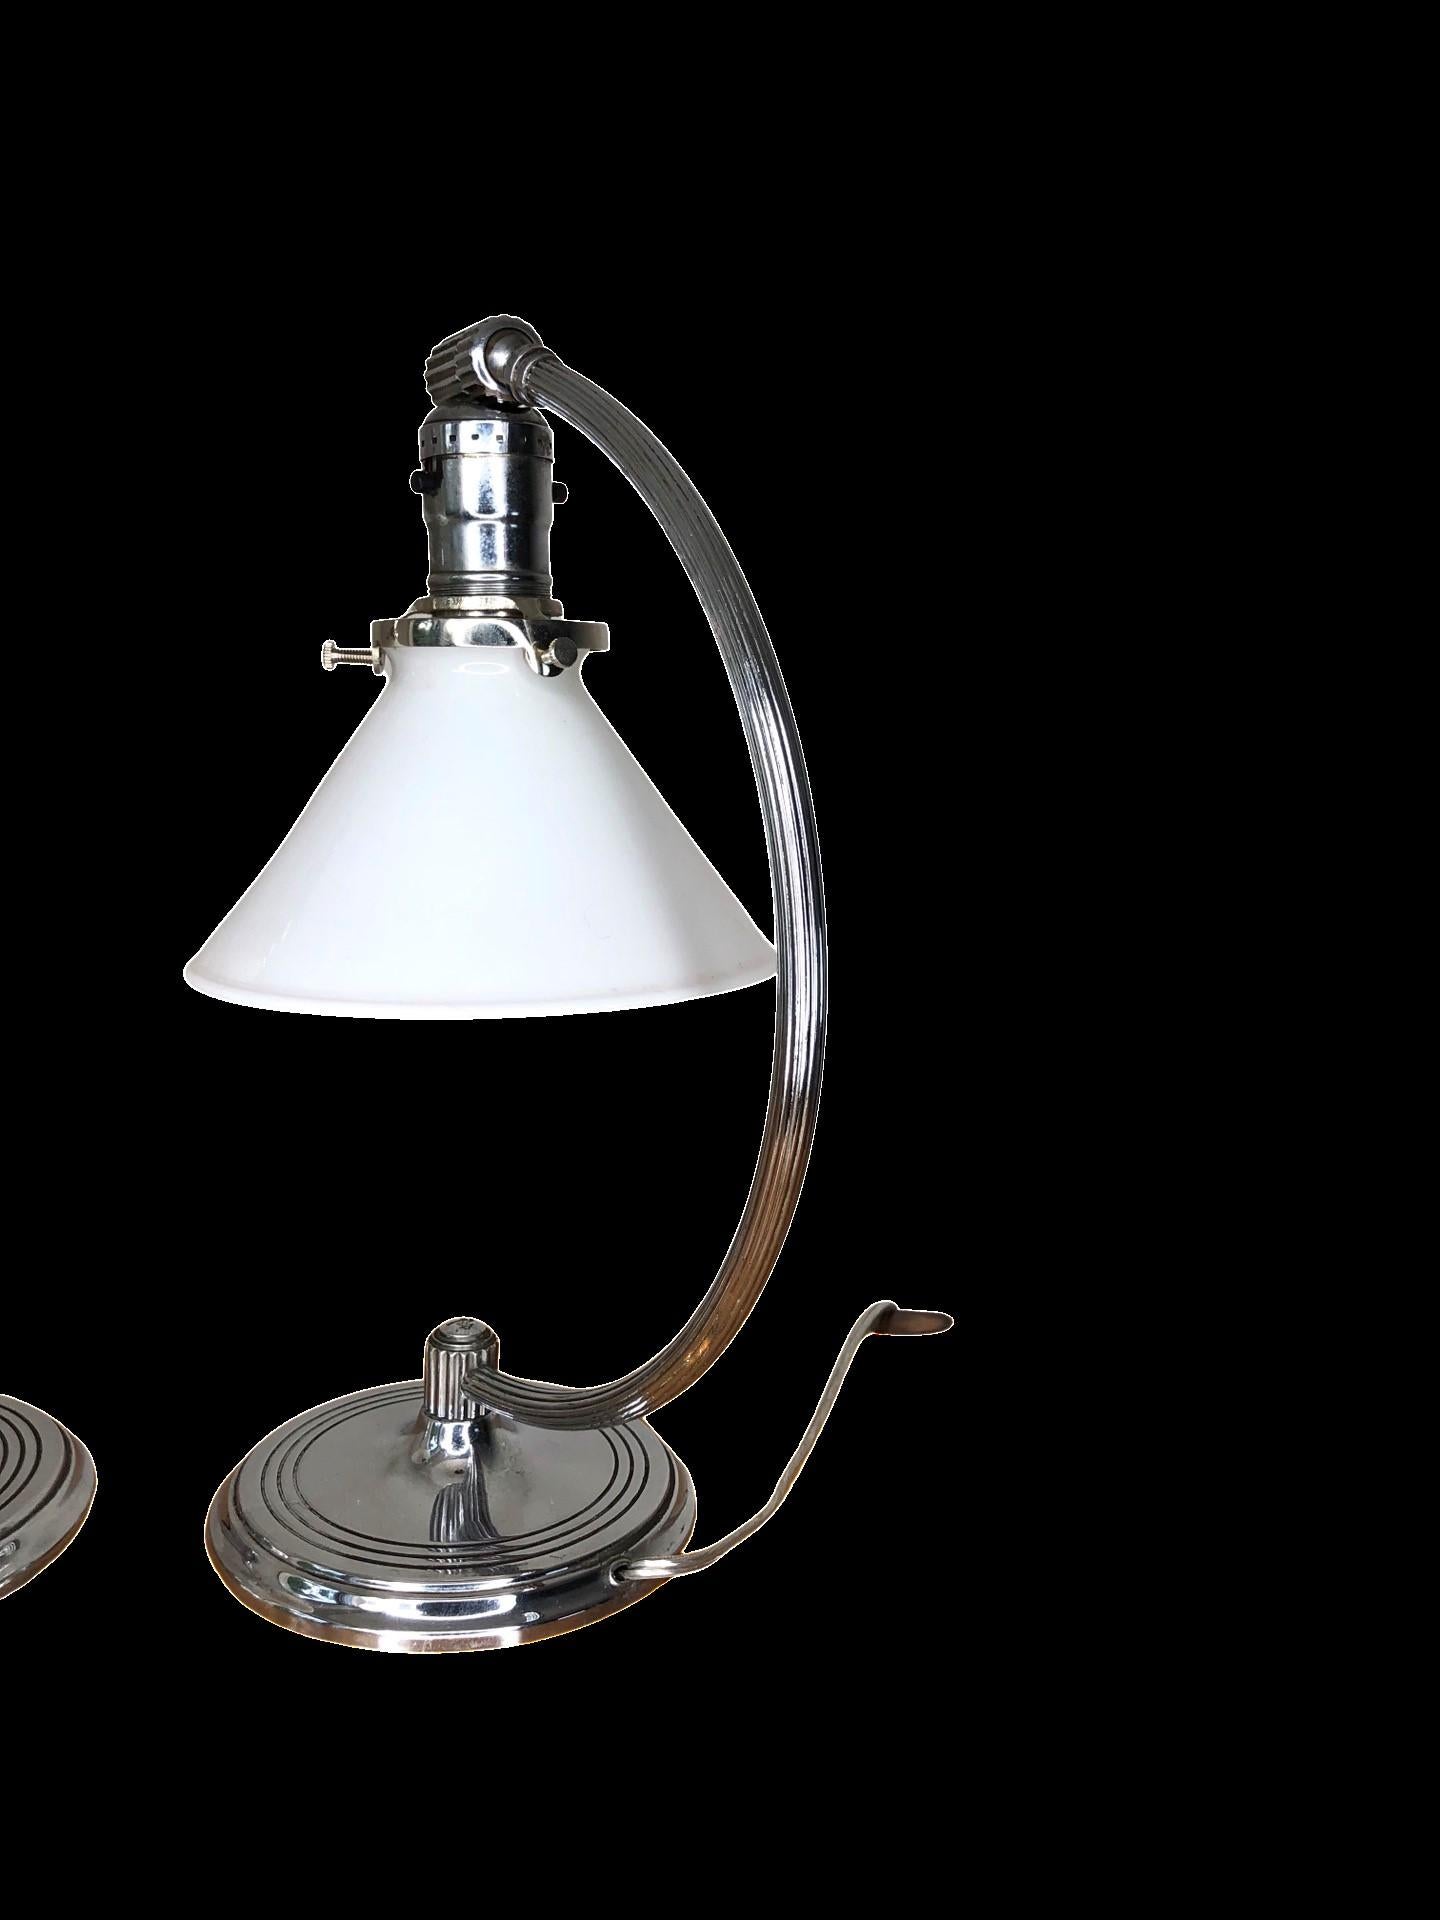 Pair of Chase Chrome Art Deco Desk Lamps For Sale 1